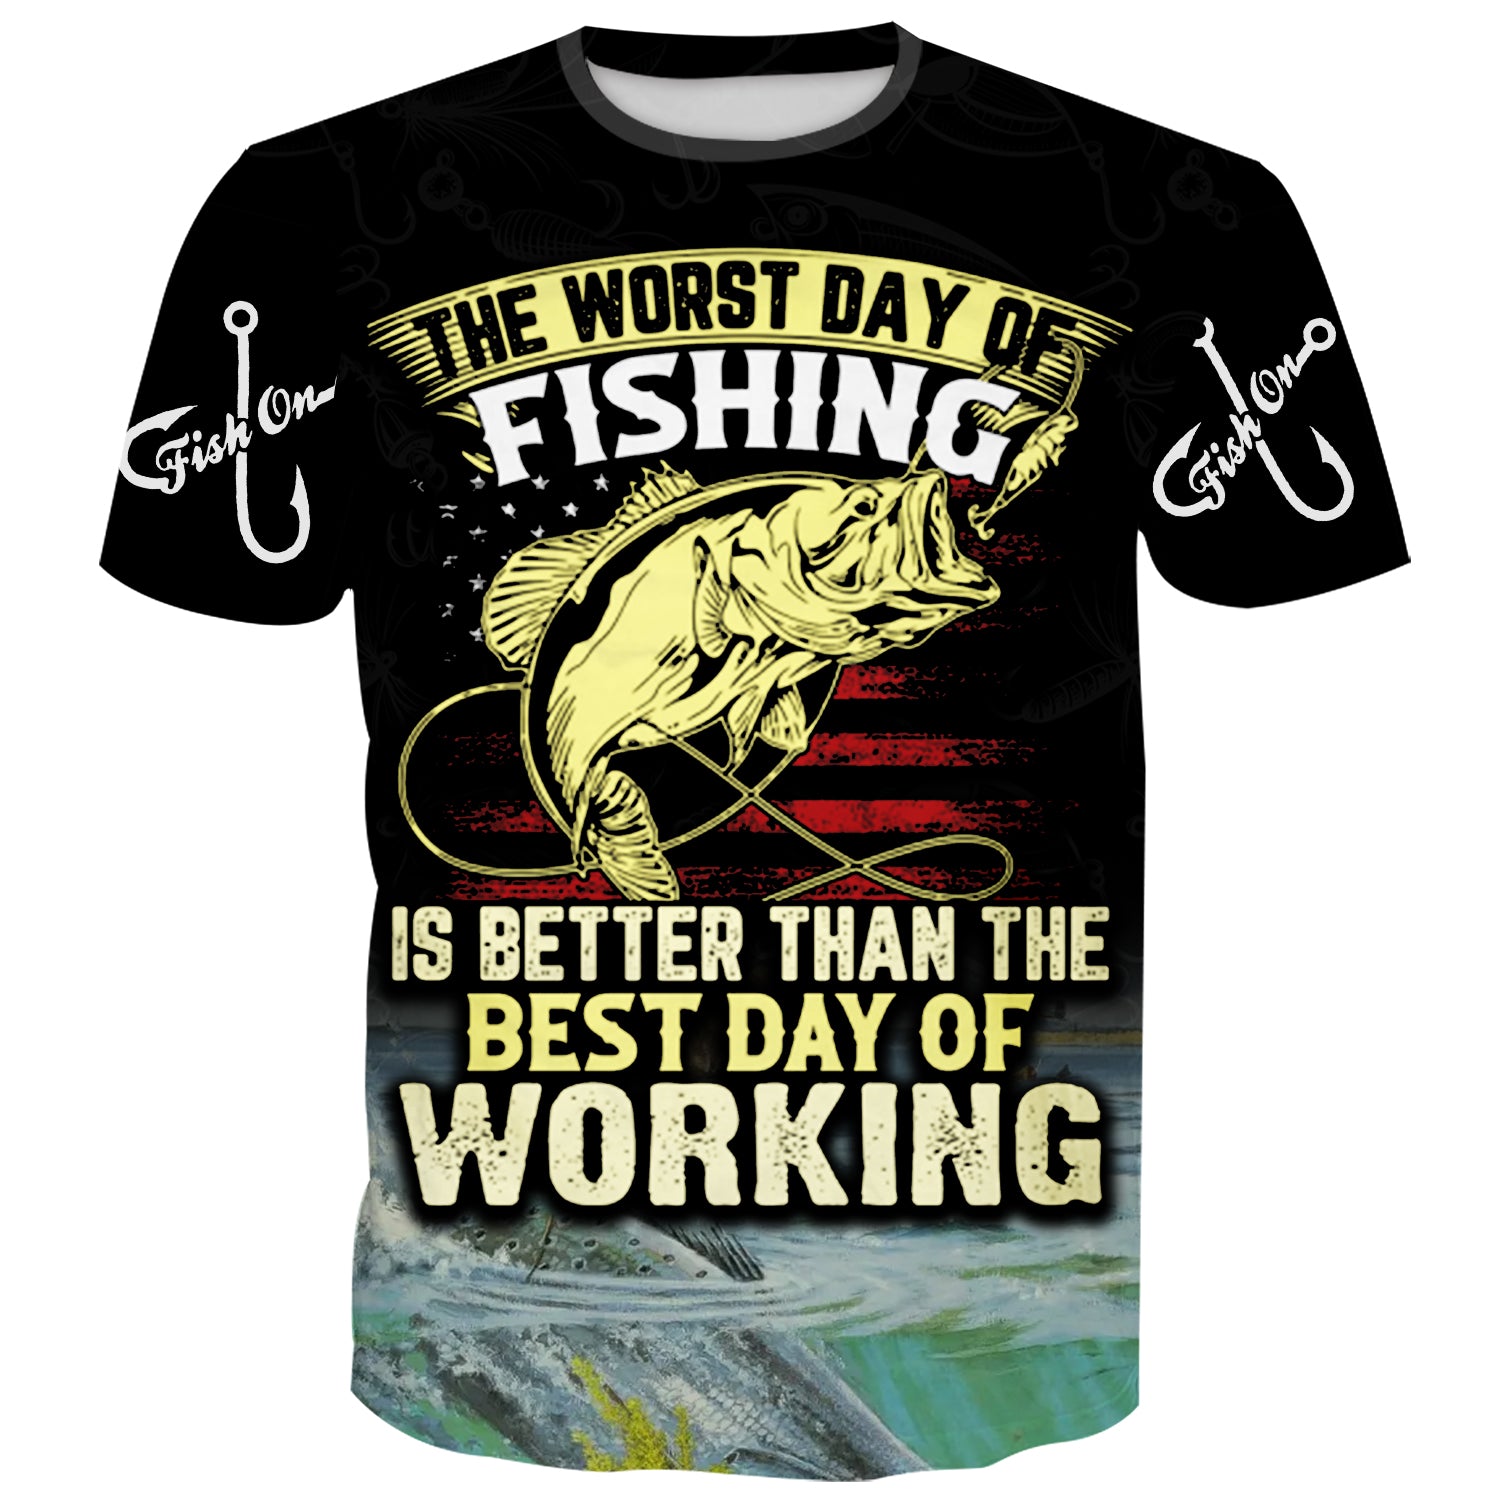 The worst day of fishing is better than the best day of working - T-Shirt